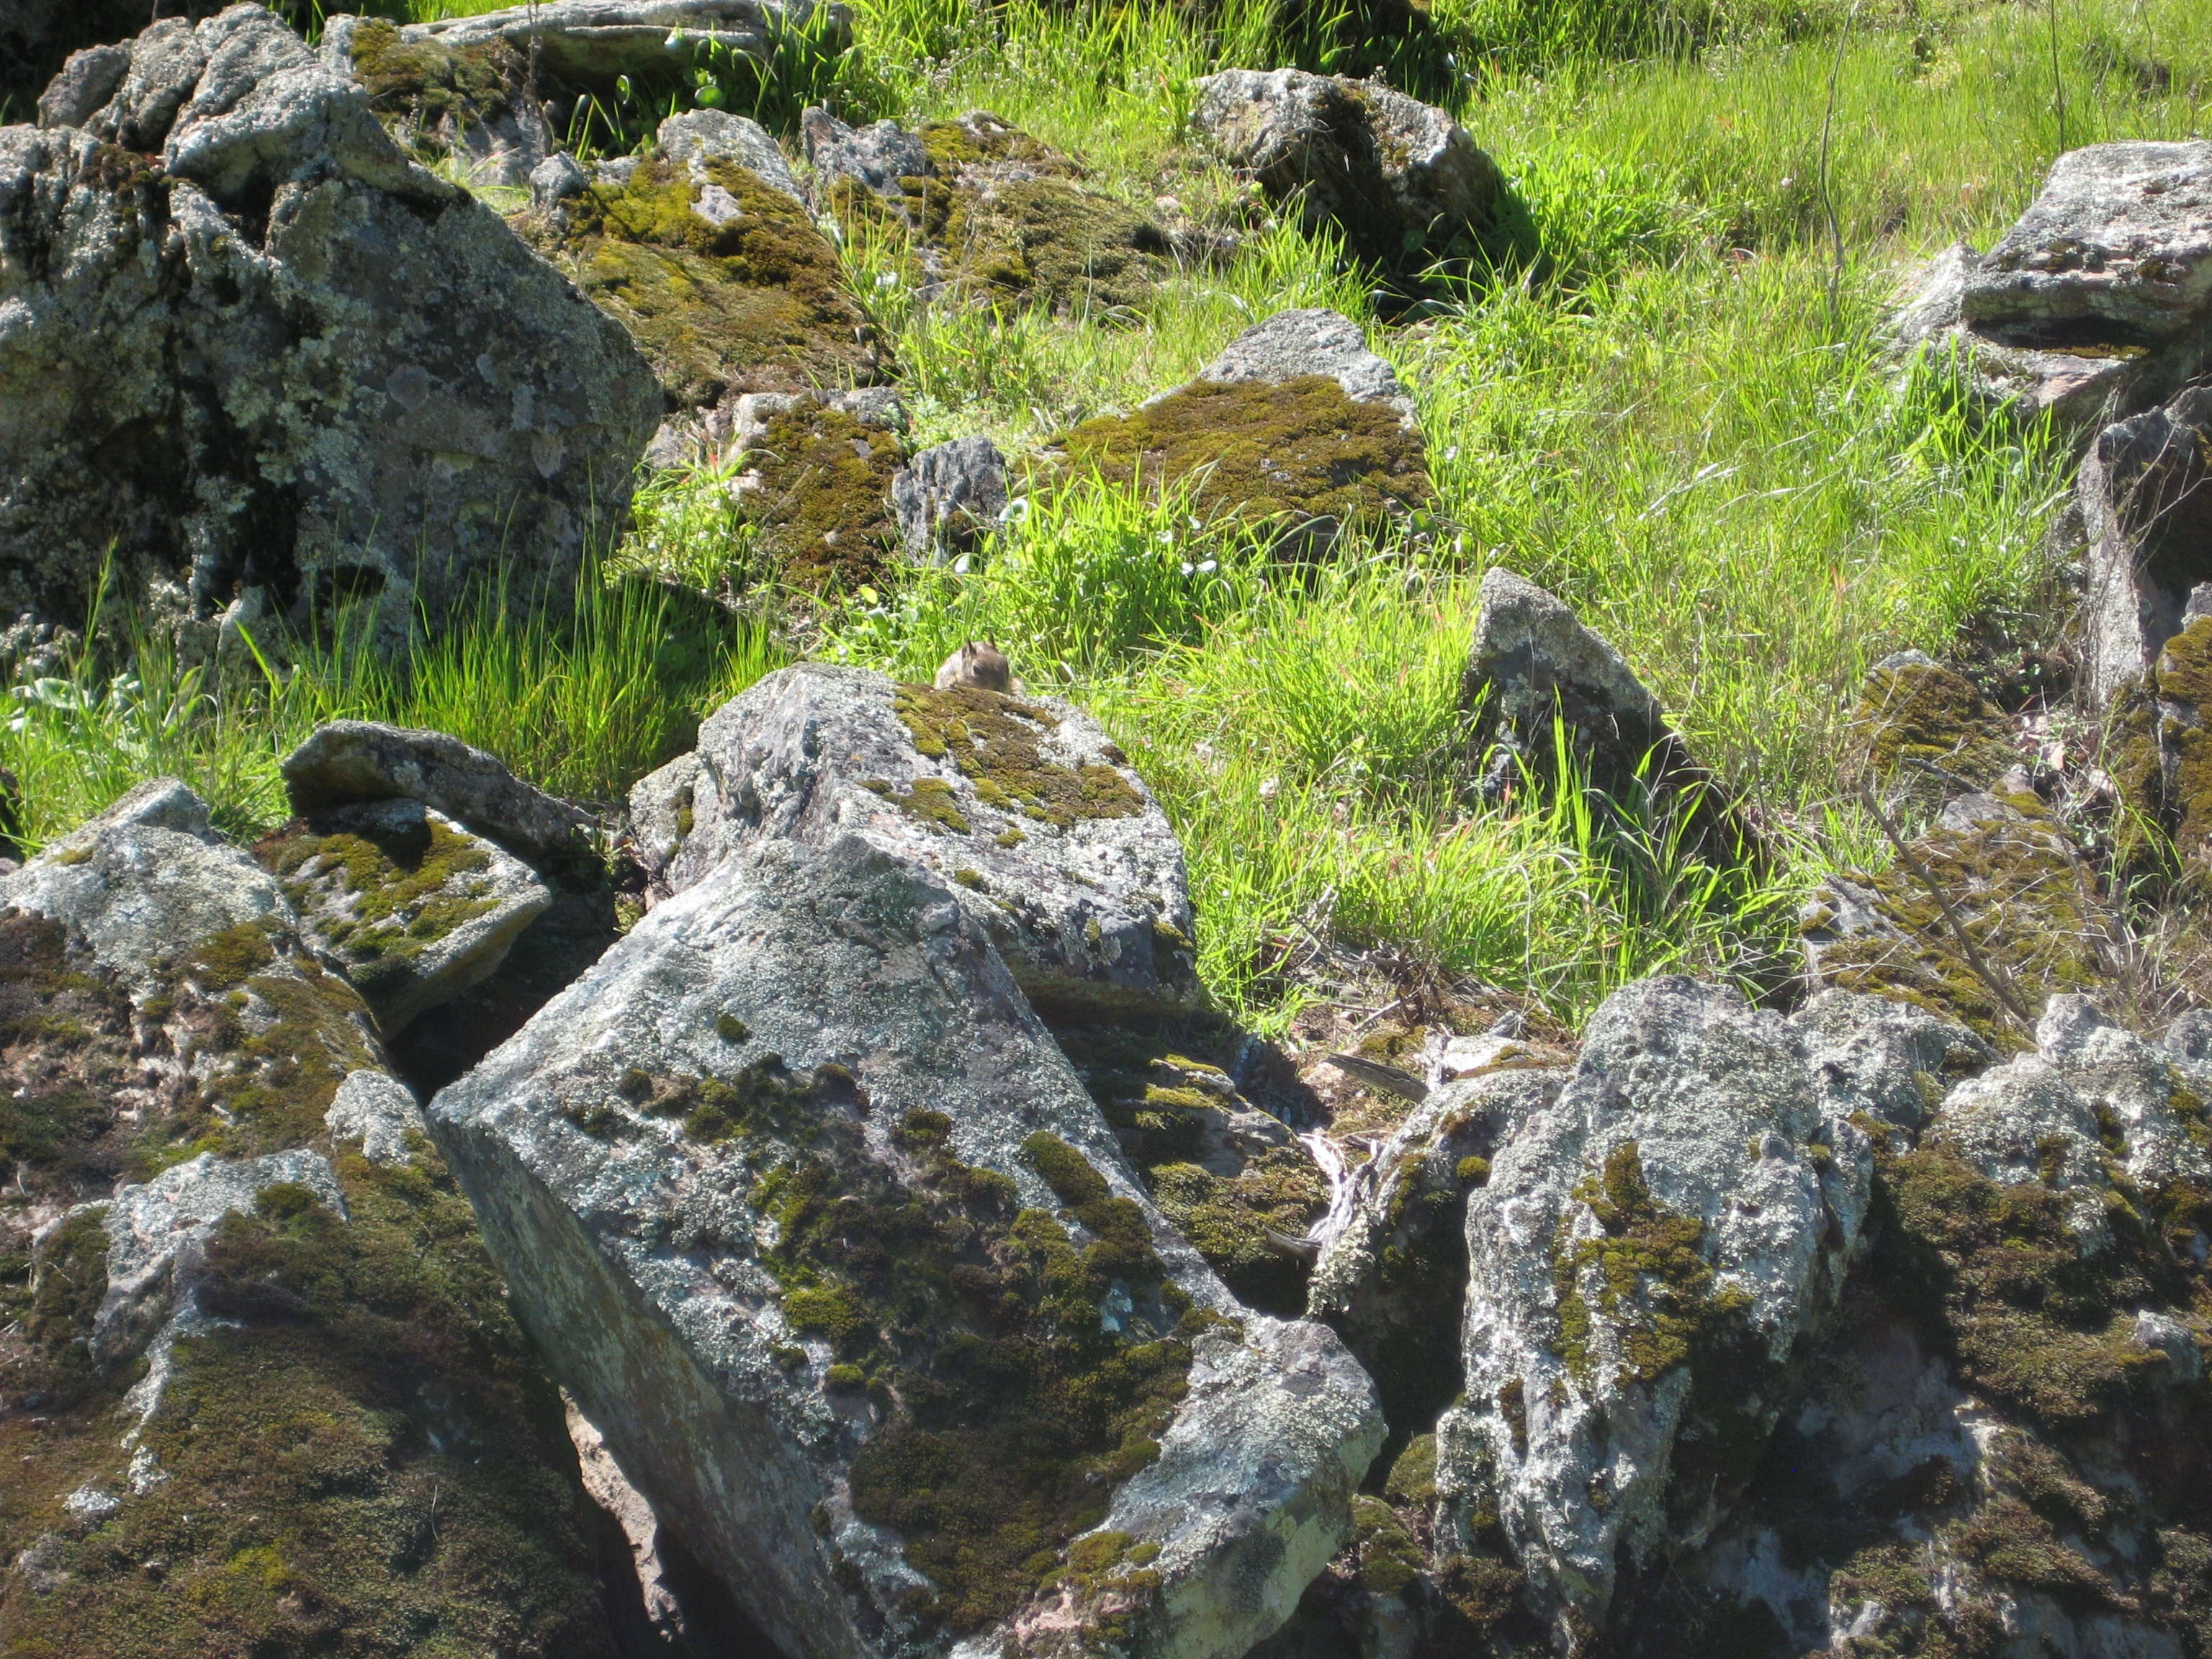 Moss-covered stones in a grassy field in Pacheco State Park, California.